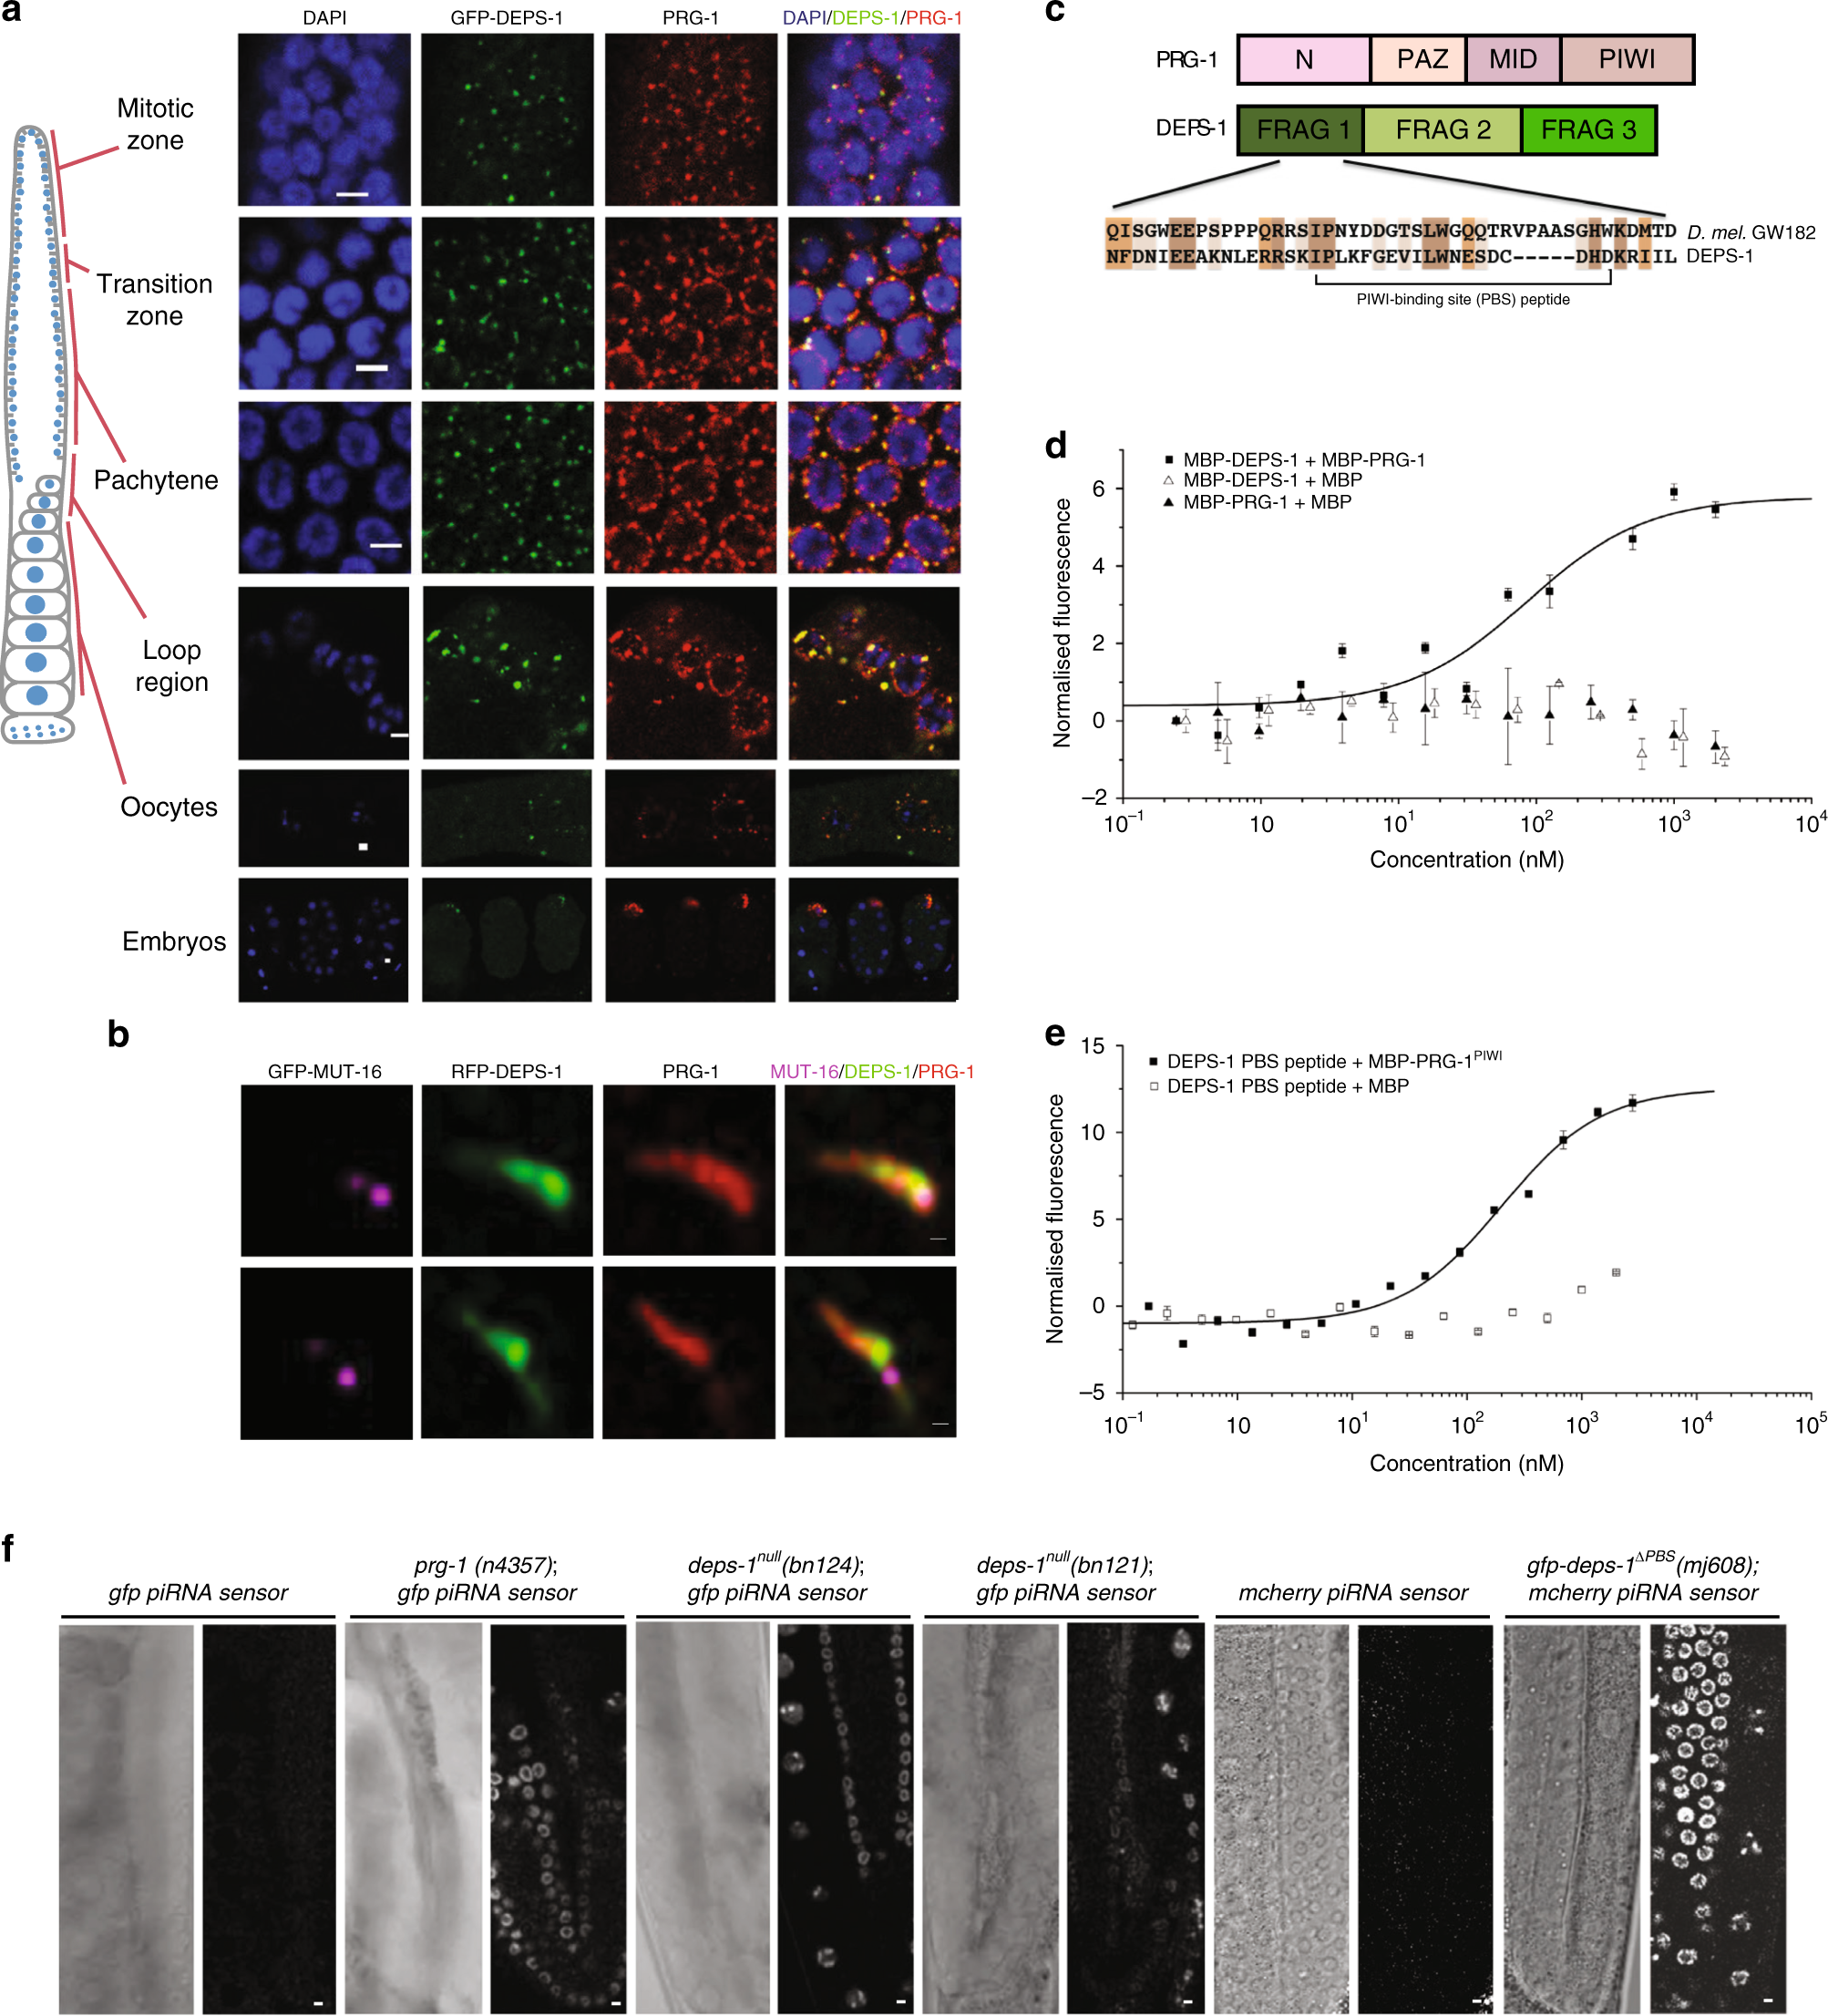 DEPS-1 is required for piRNA-dependent silencing and PIWI condensate  organisation in Caenorhabditis elegans | Nature Communications